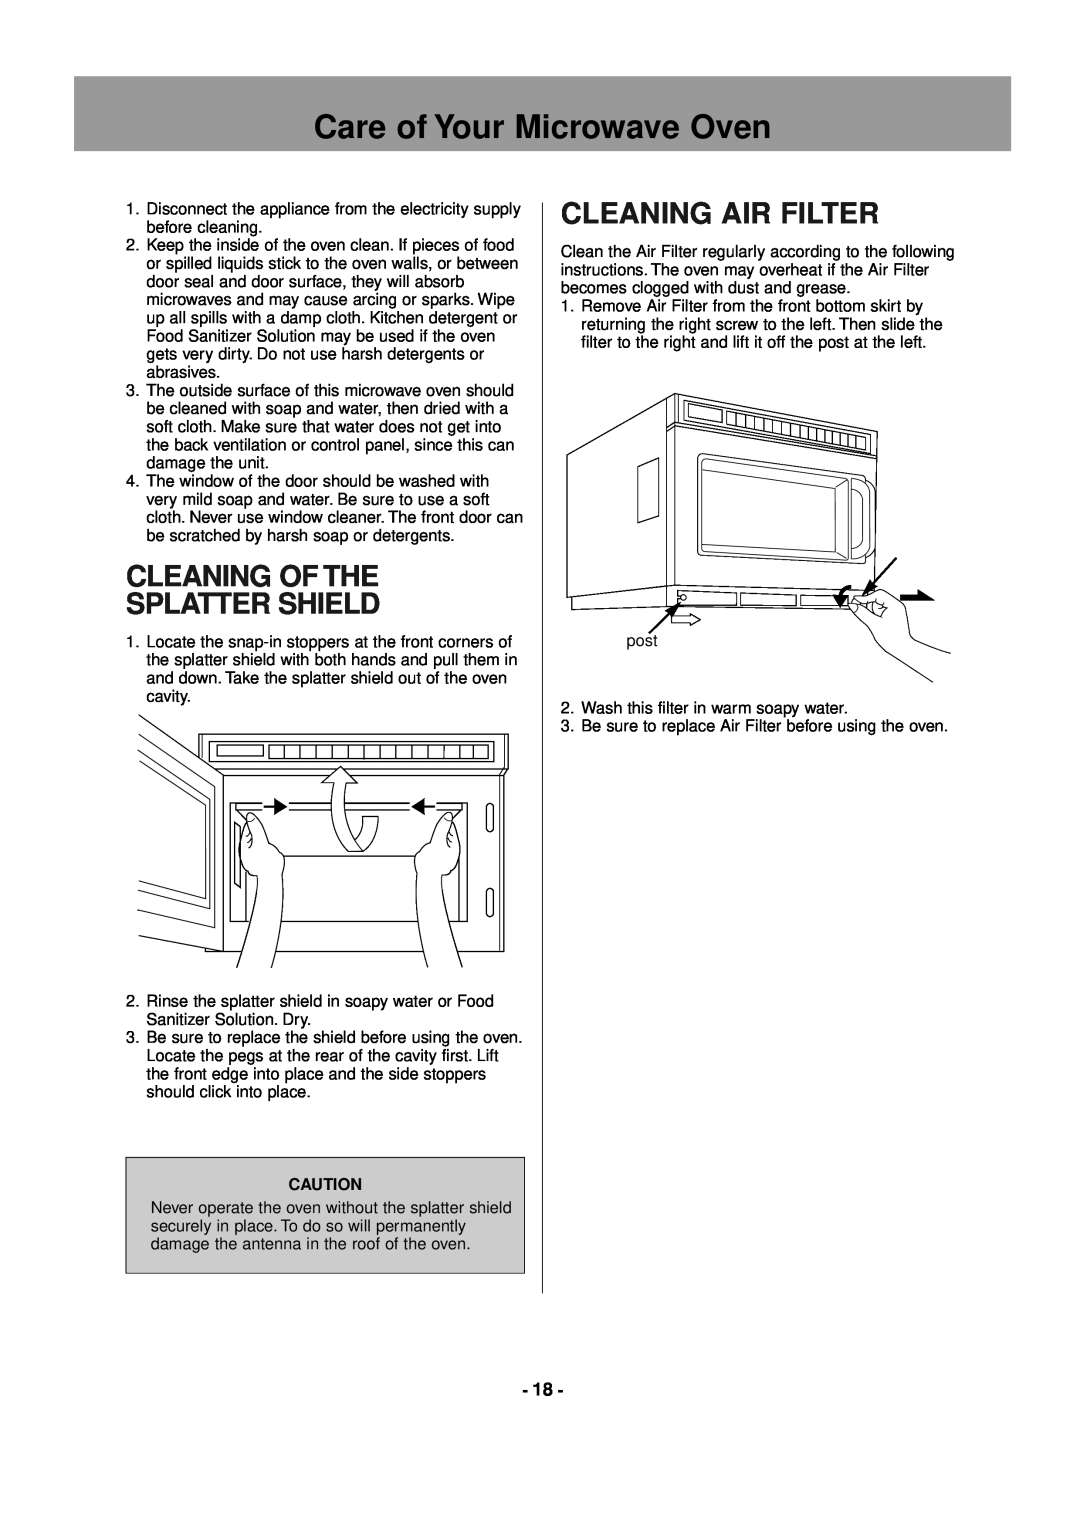 Panasonic NE-1456, NE-1856, NE-1846 Care of Your Microwave Oven, Cleaning Of The Splatter Shield, Cleaning Air Filter 